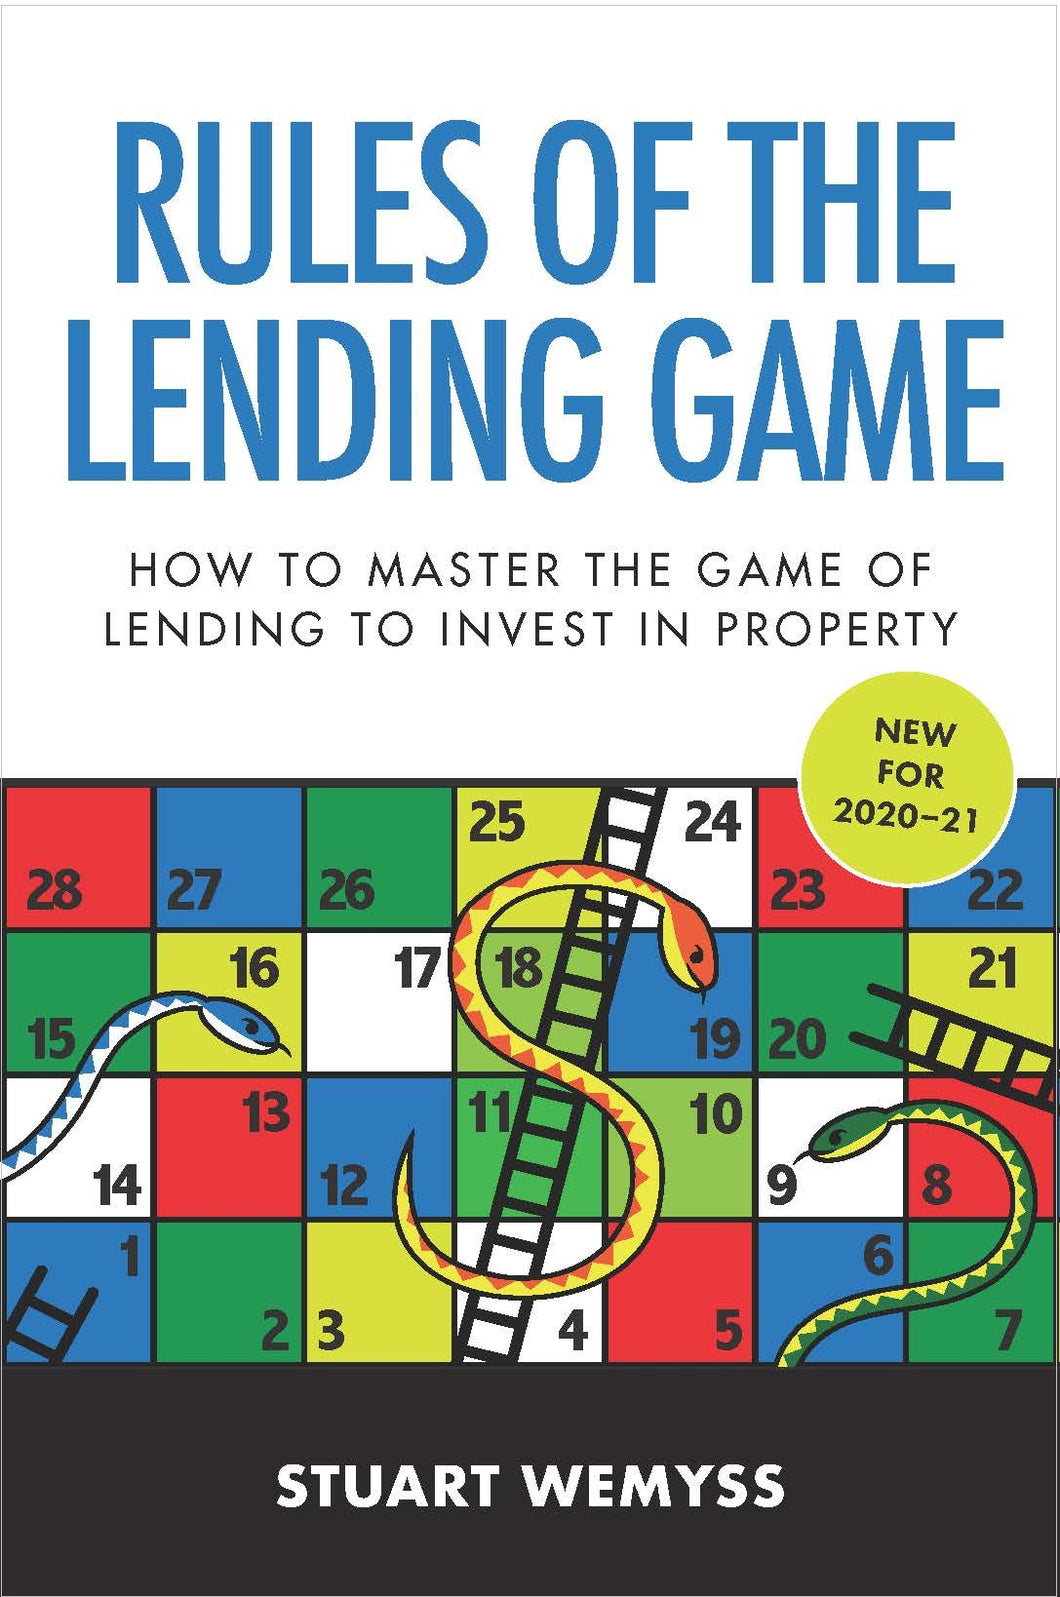 Rules of the Lending Game<br><i><small>by Stuart Wemyss</i></small>